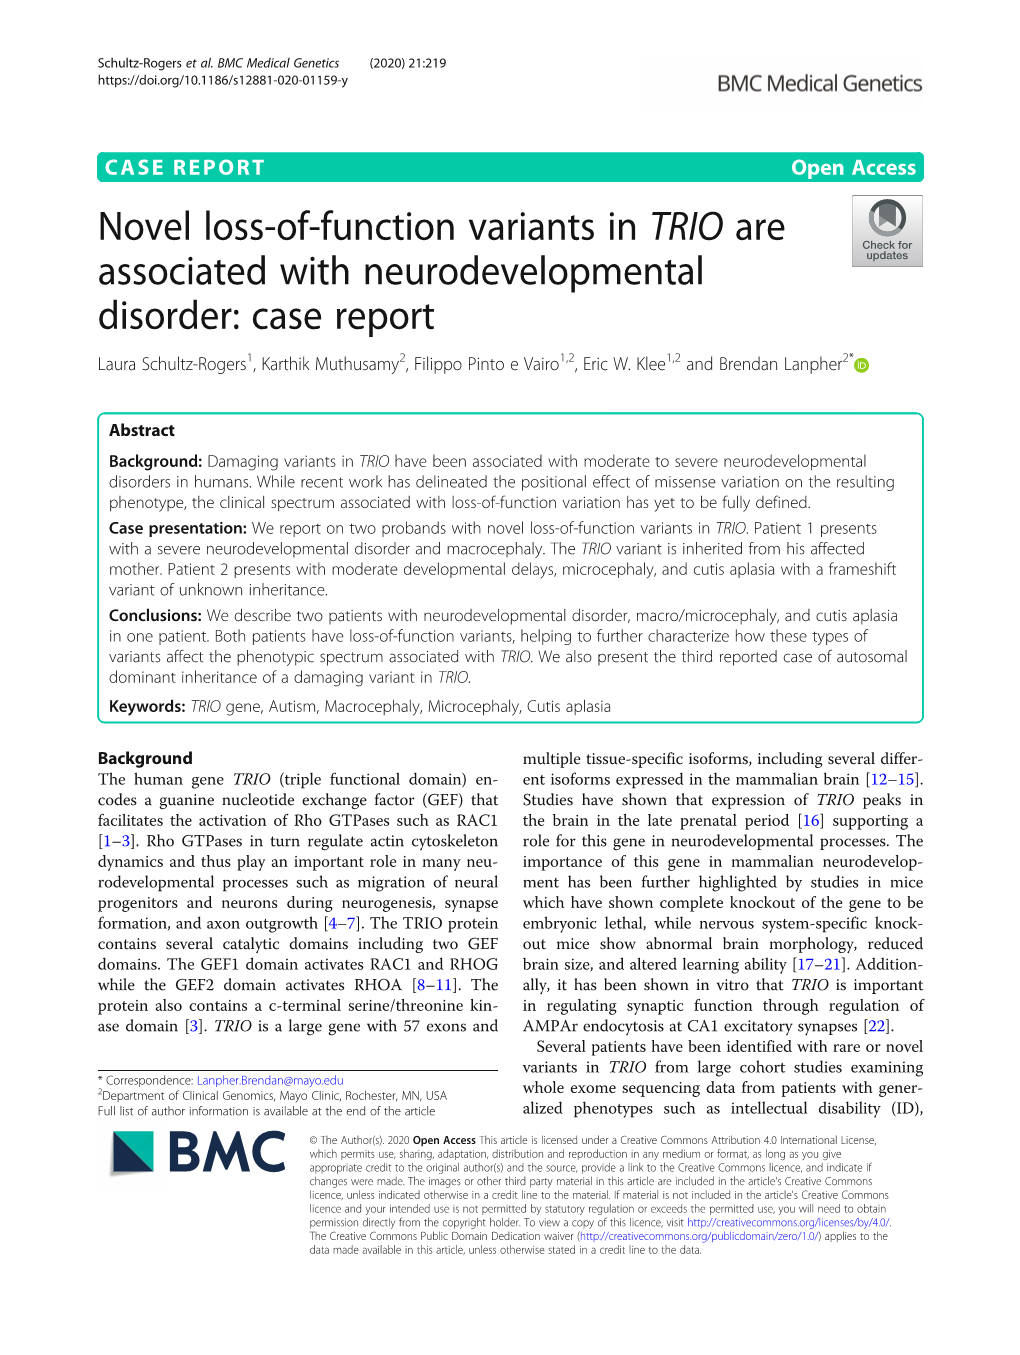 Novel Loss-Of-Function Variants in TRIO Are Associated With